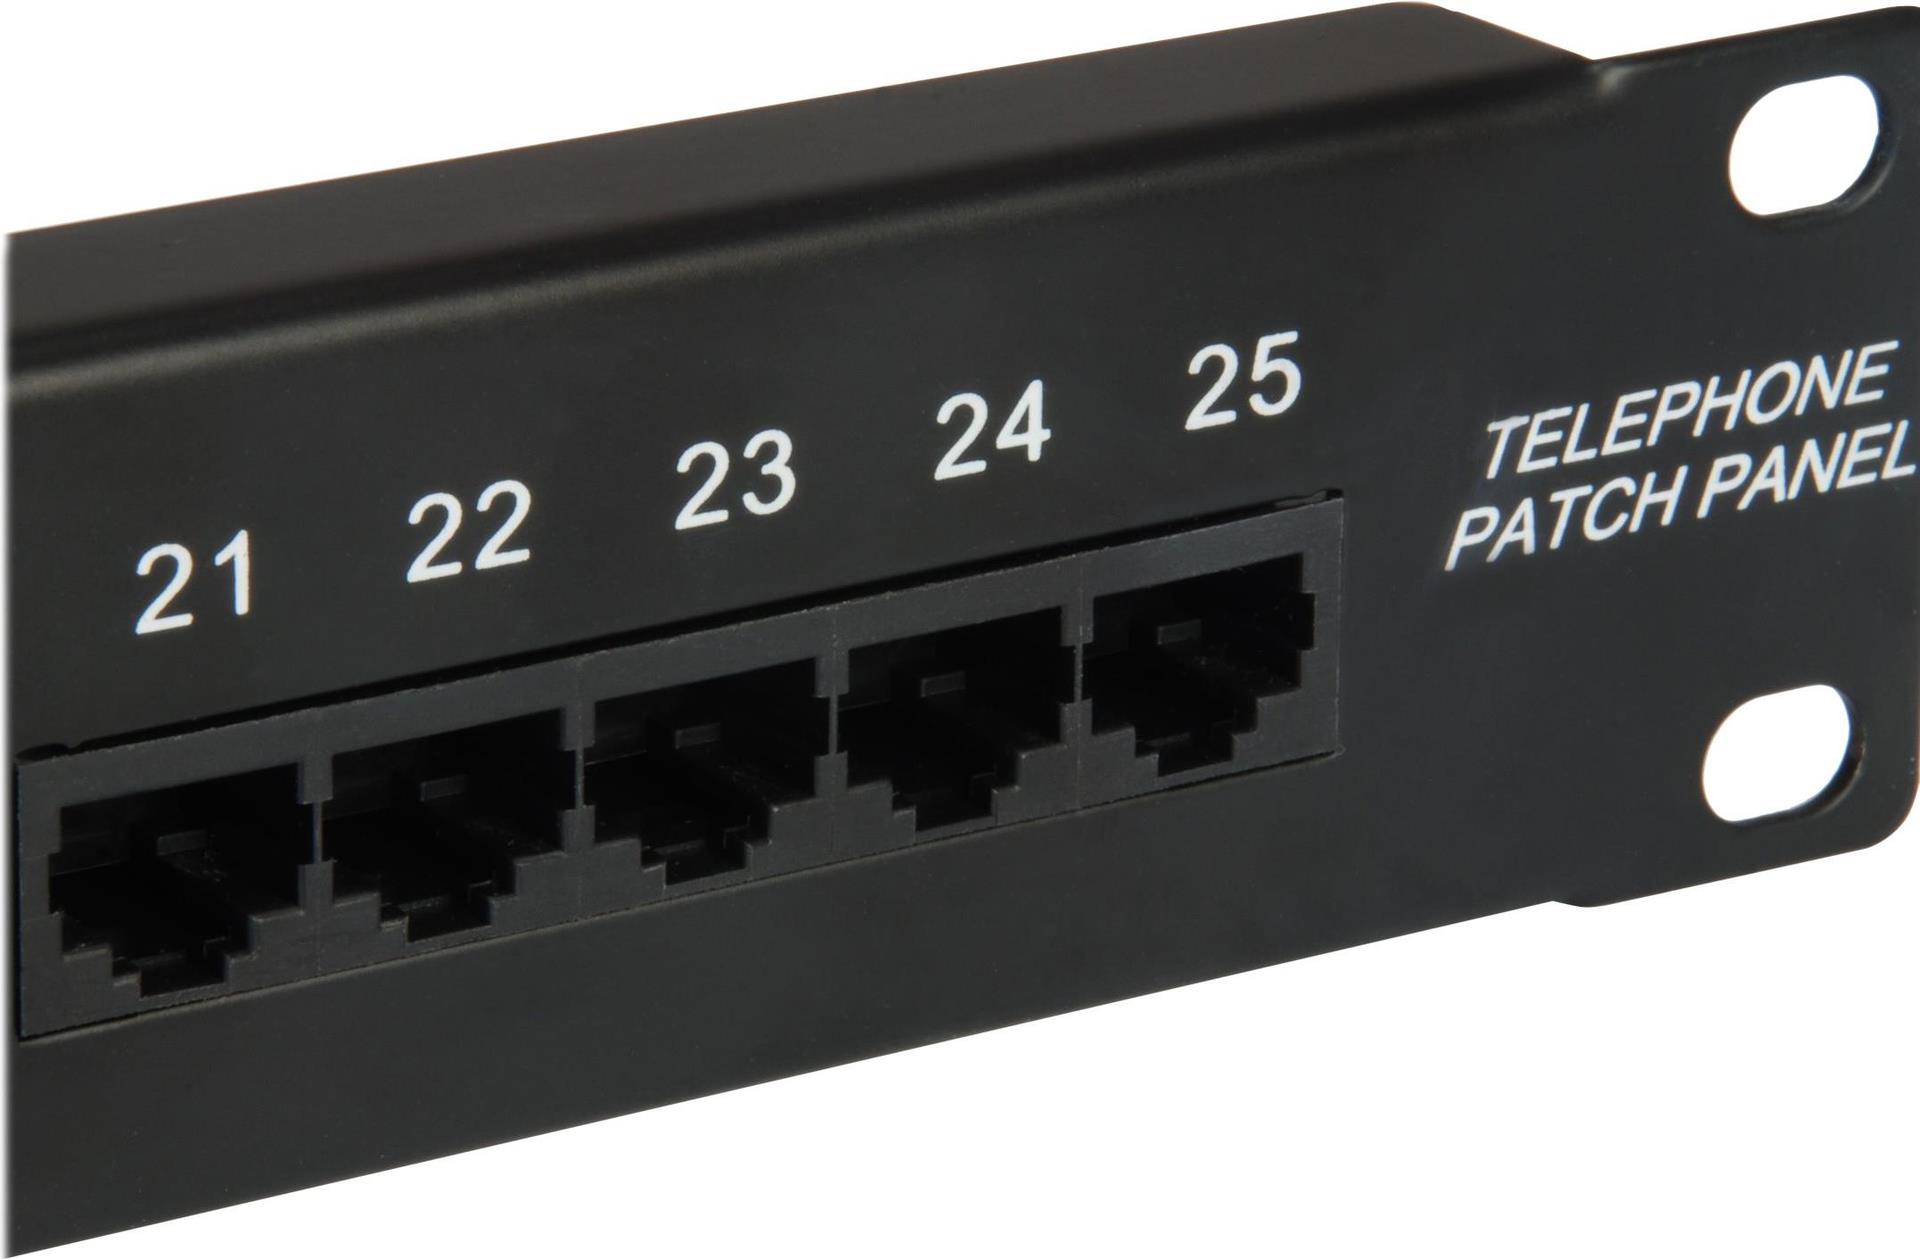 equip Pro ISDN Patch Panel (125298)